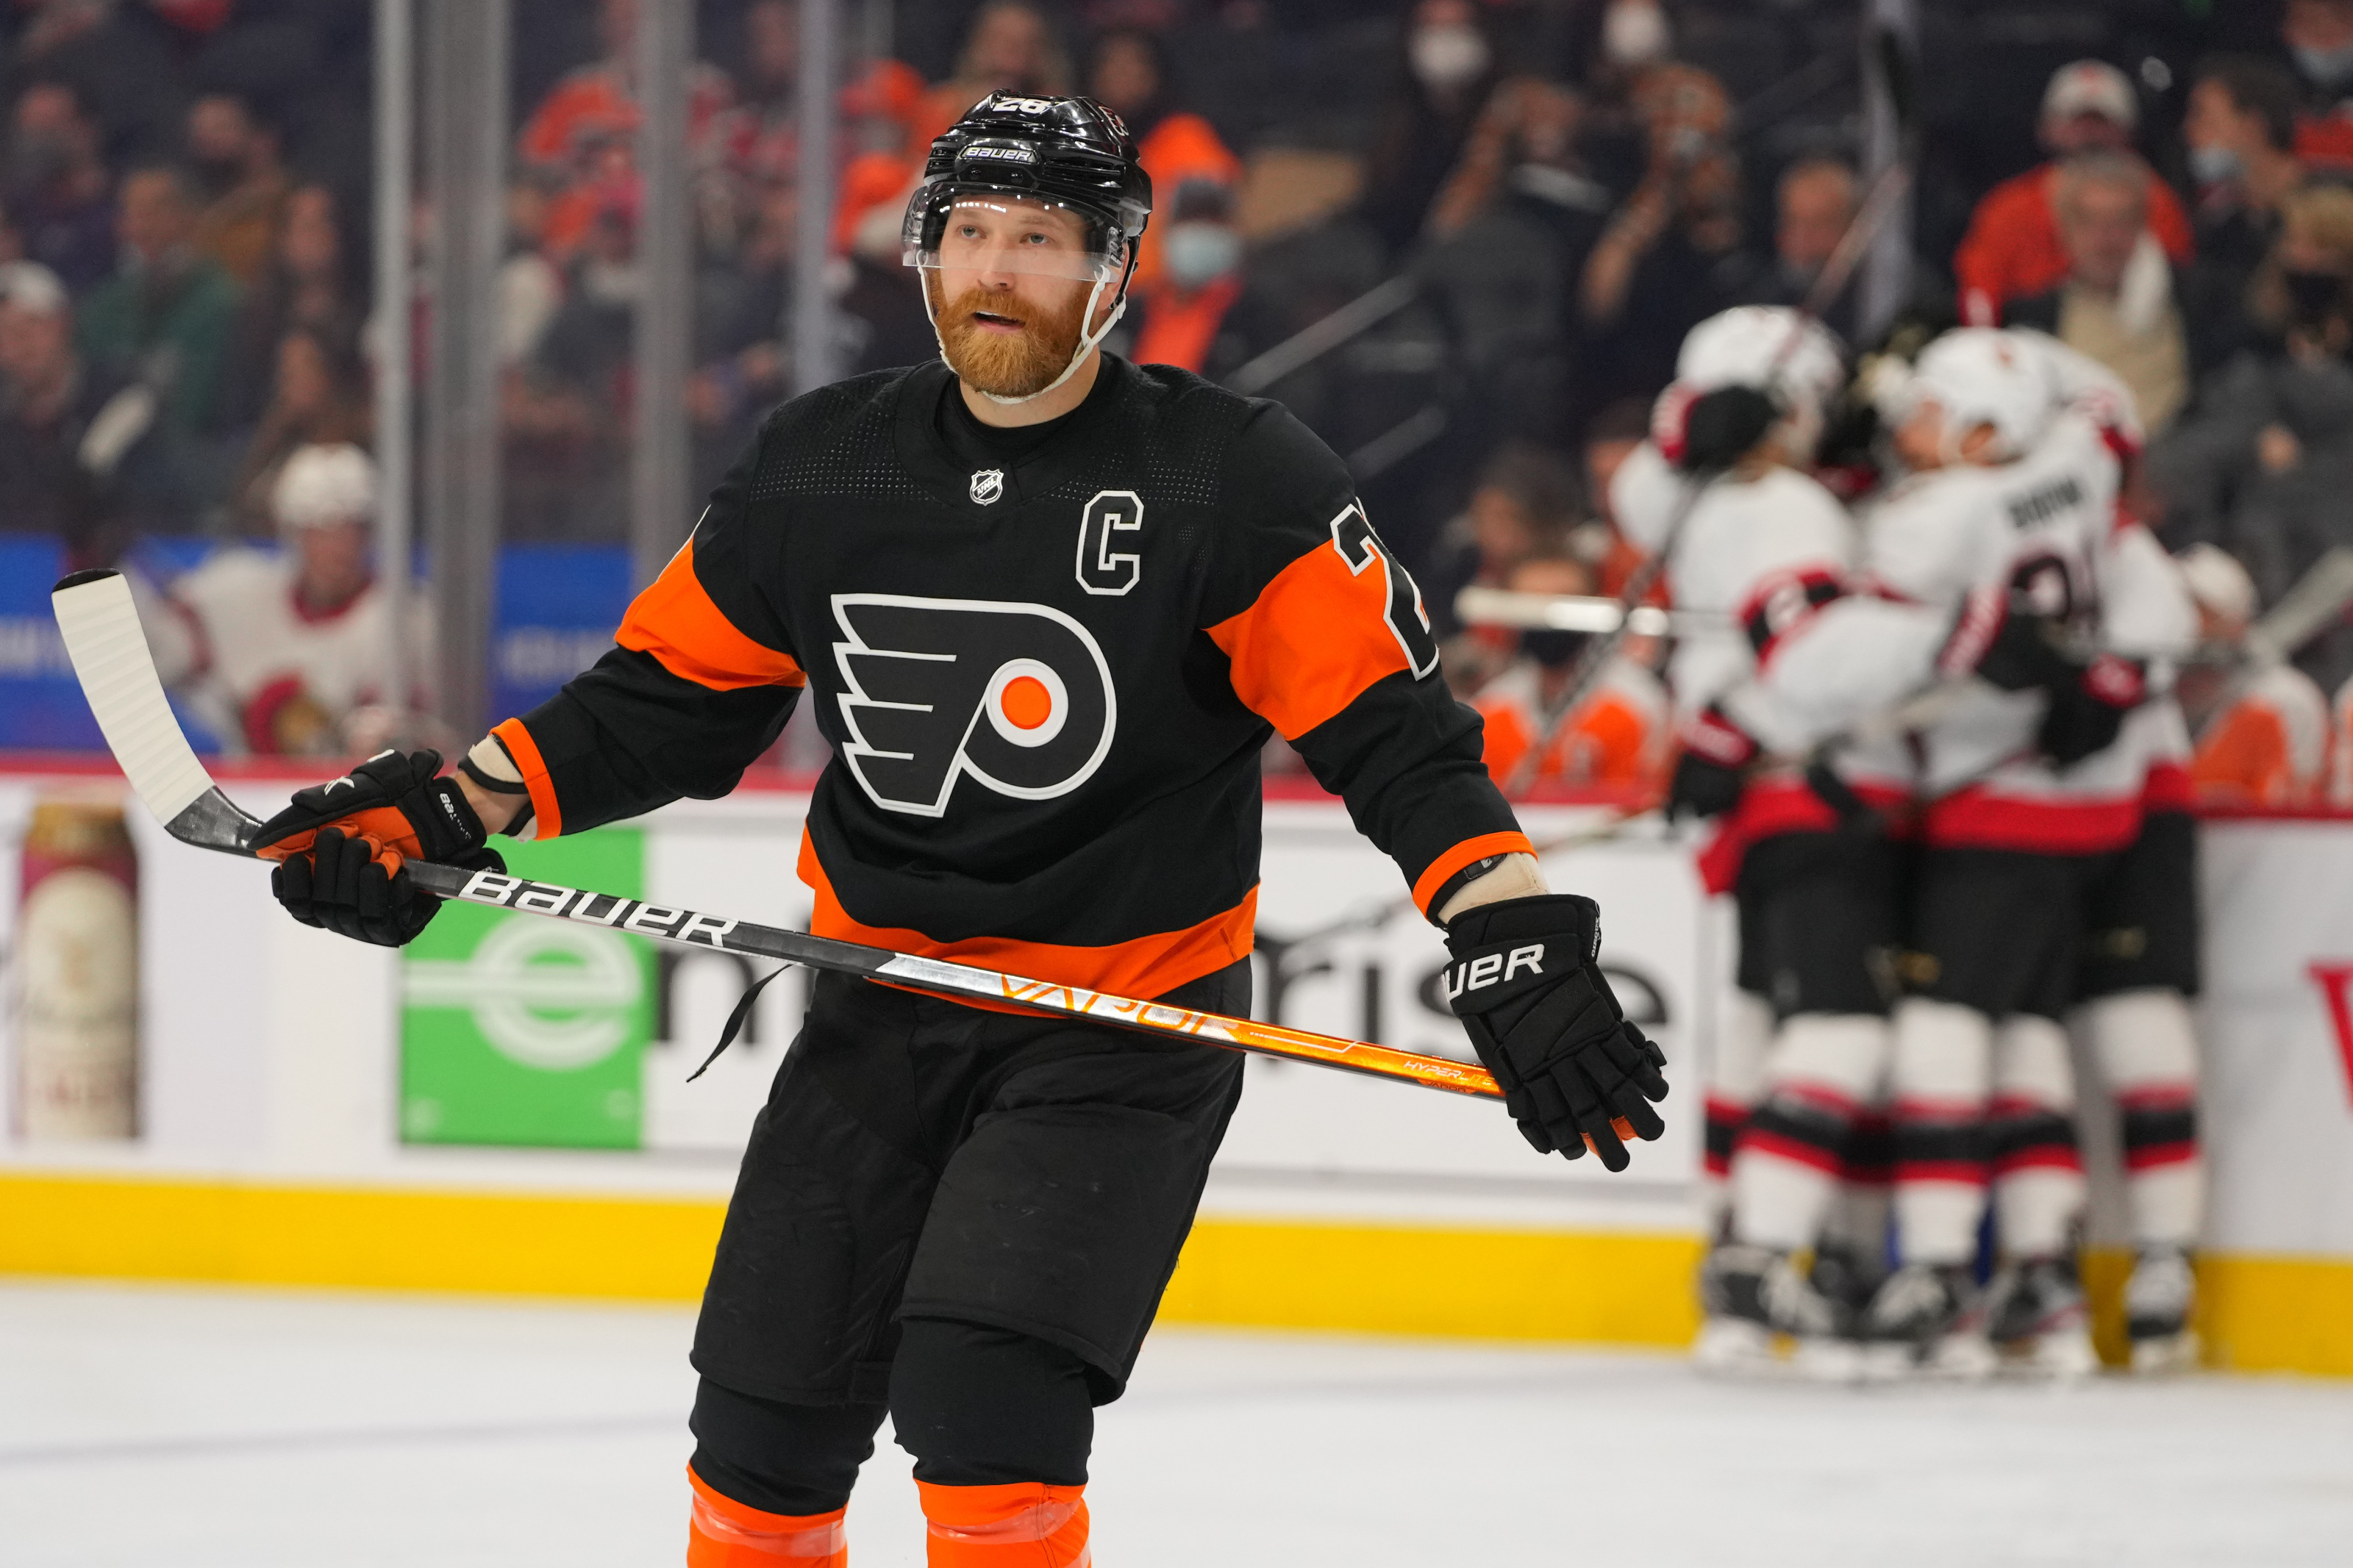 Back Injury Likely To Force Ryan Ellis Into Retirement